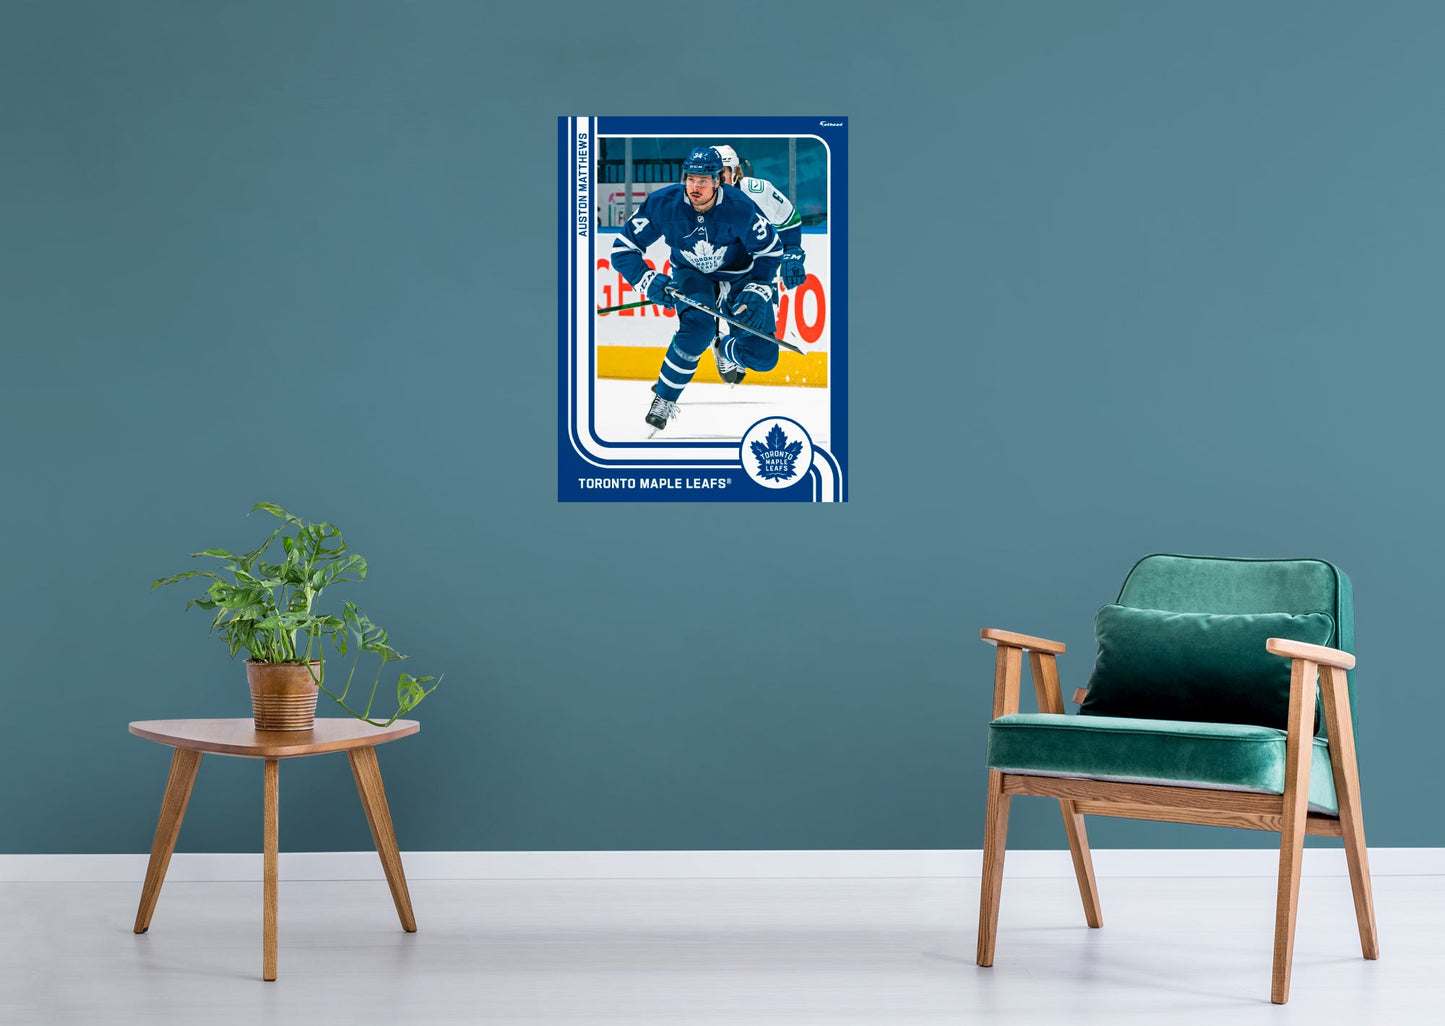 Toronto Maple Leafs: Auston Matthews Poster - Officially Licensed NHL Removable Adhesive Decal